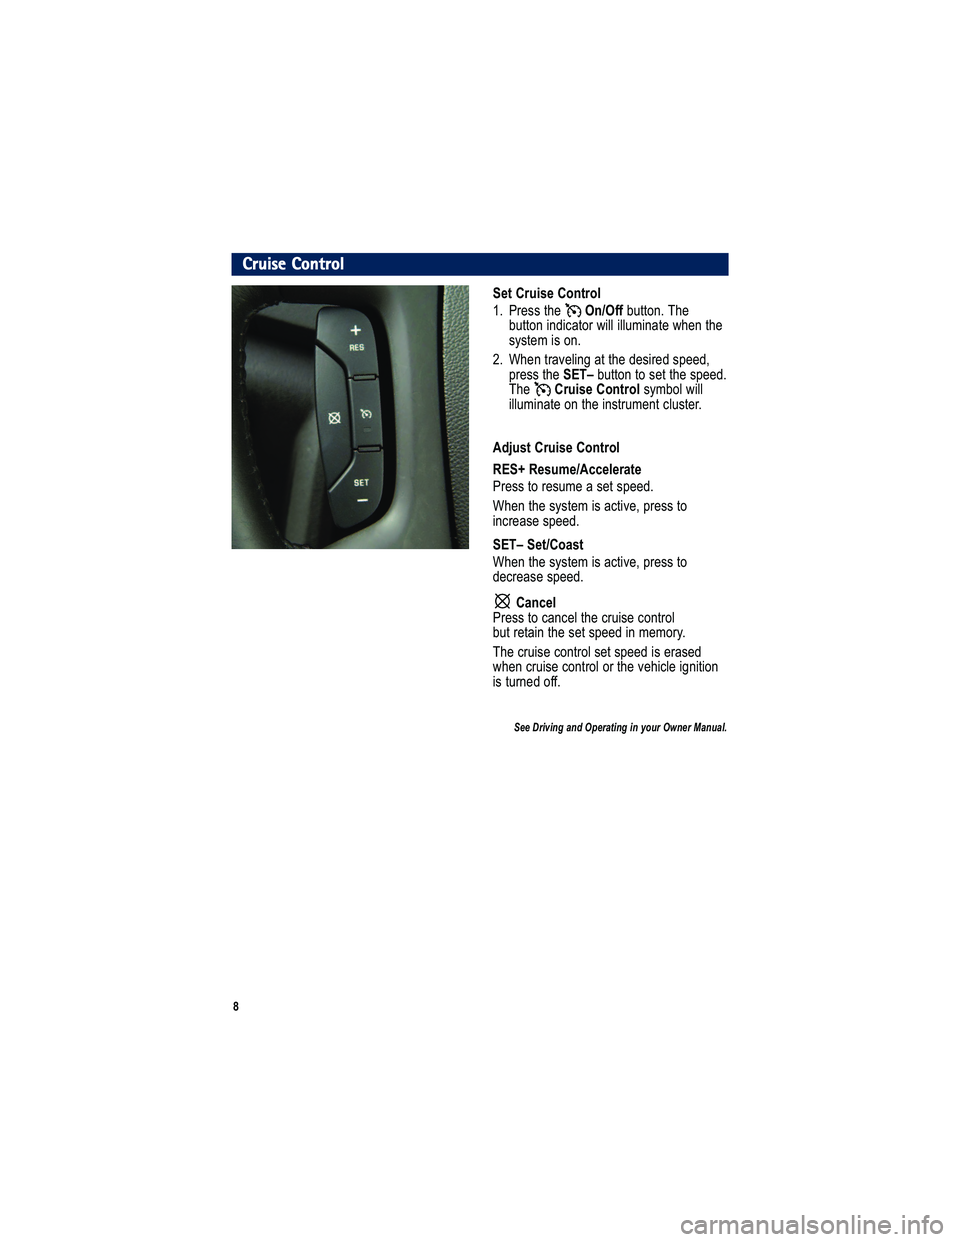 GMC ACADIA 2010  Get To Know Guide 
Cruise Control
" ,:  8; 09 ,  65:8 6 3

  "</ == >2 /  5 -- ,?>> 9 8  & 2/
, ?>>9 8 38 .3- + >9 < A 366  366? 7 38 +>/  A 2/8 >2 /
= C=>/ 7  3=  9 8
  ) 2/8 >< + @/ 638 1 + >  >2 / . /=3< 